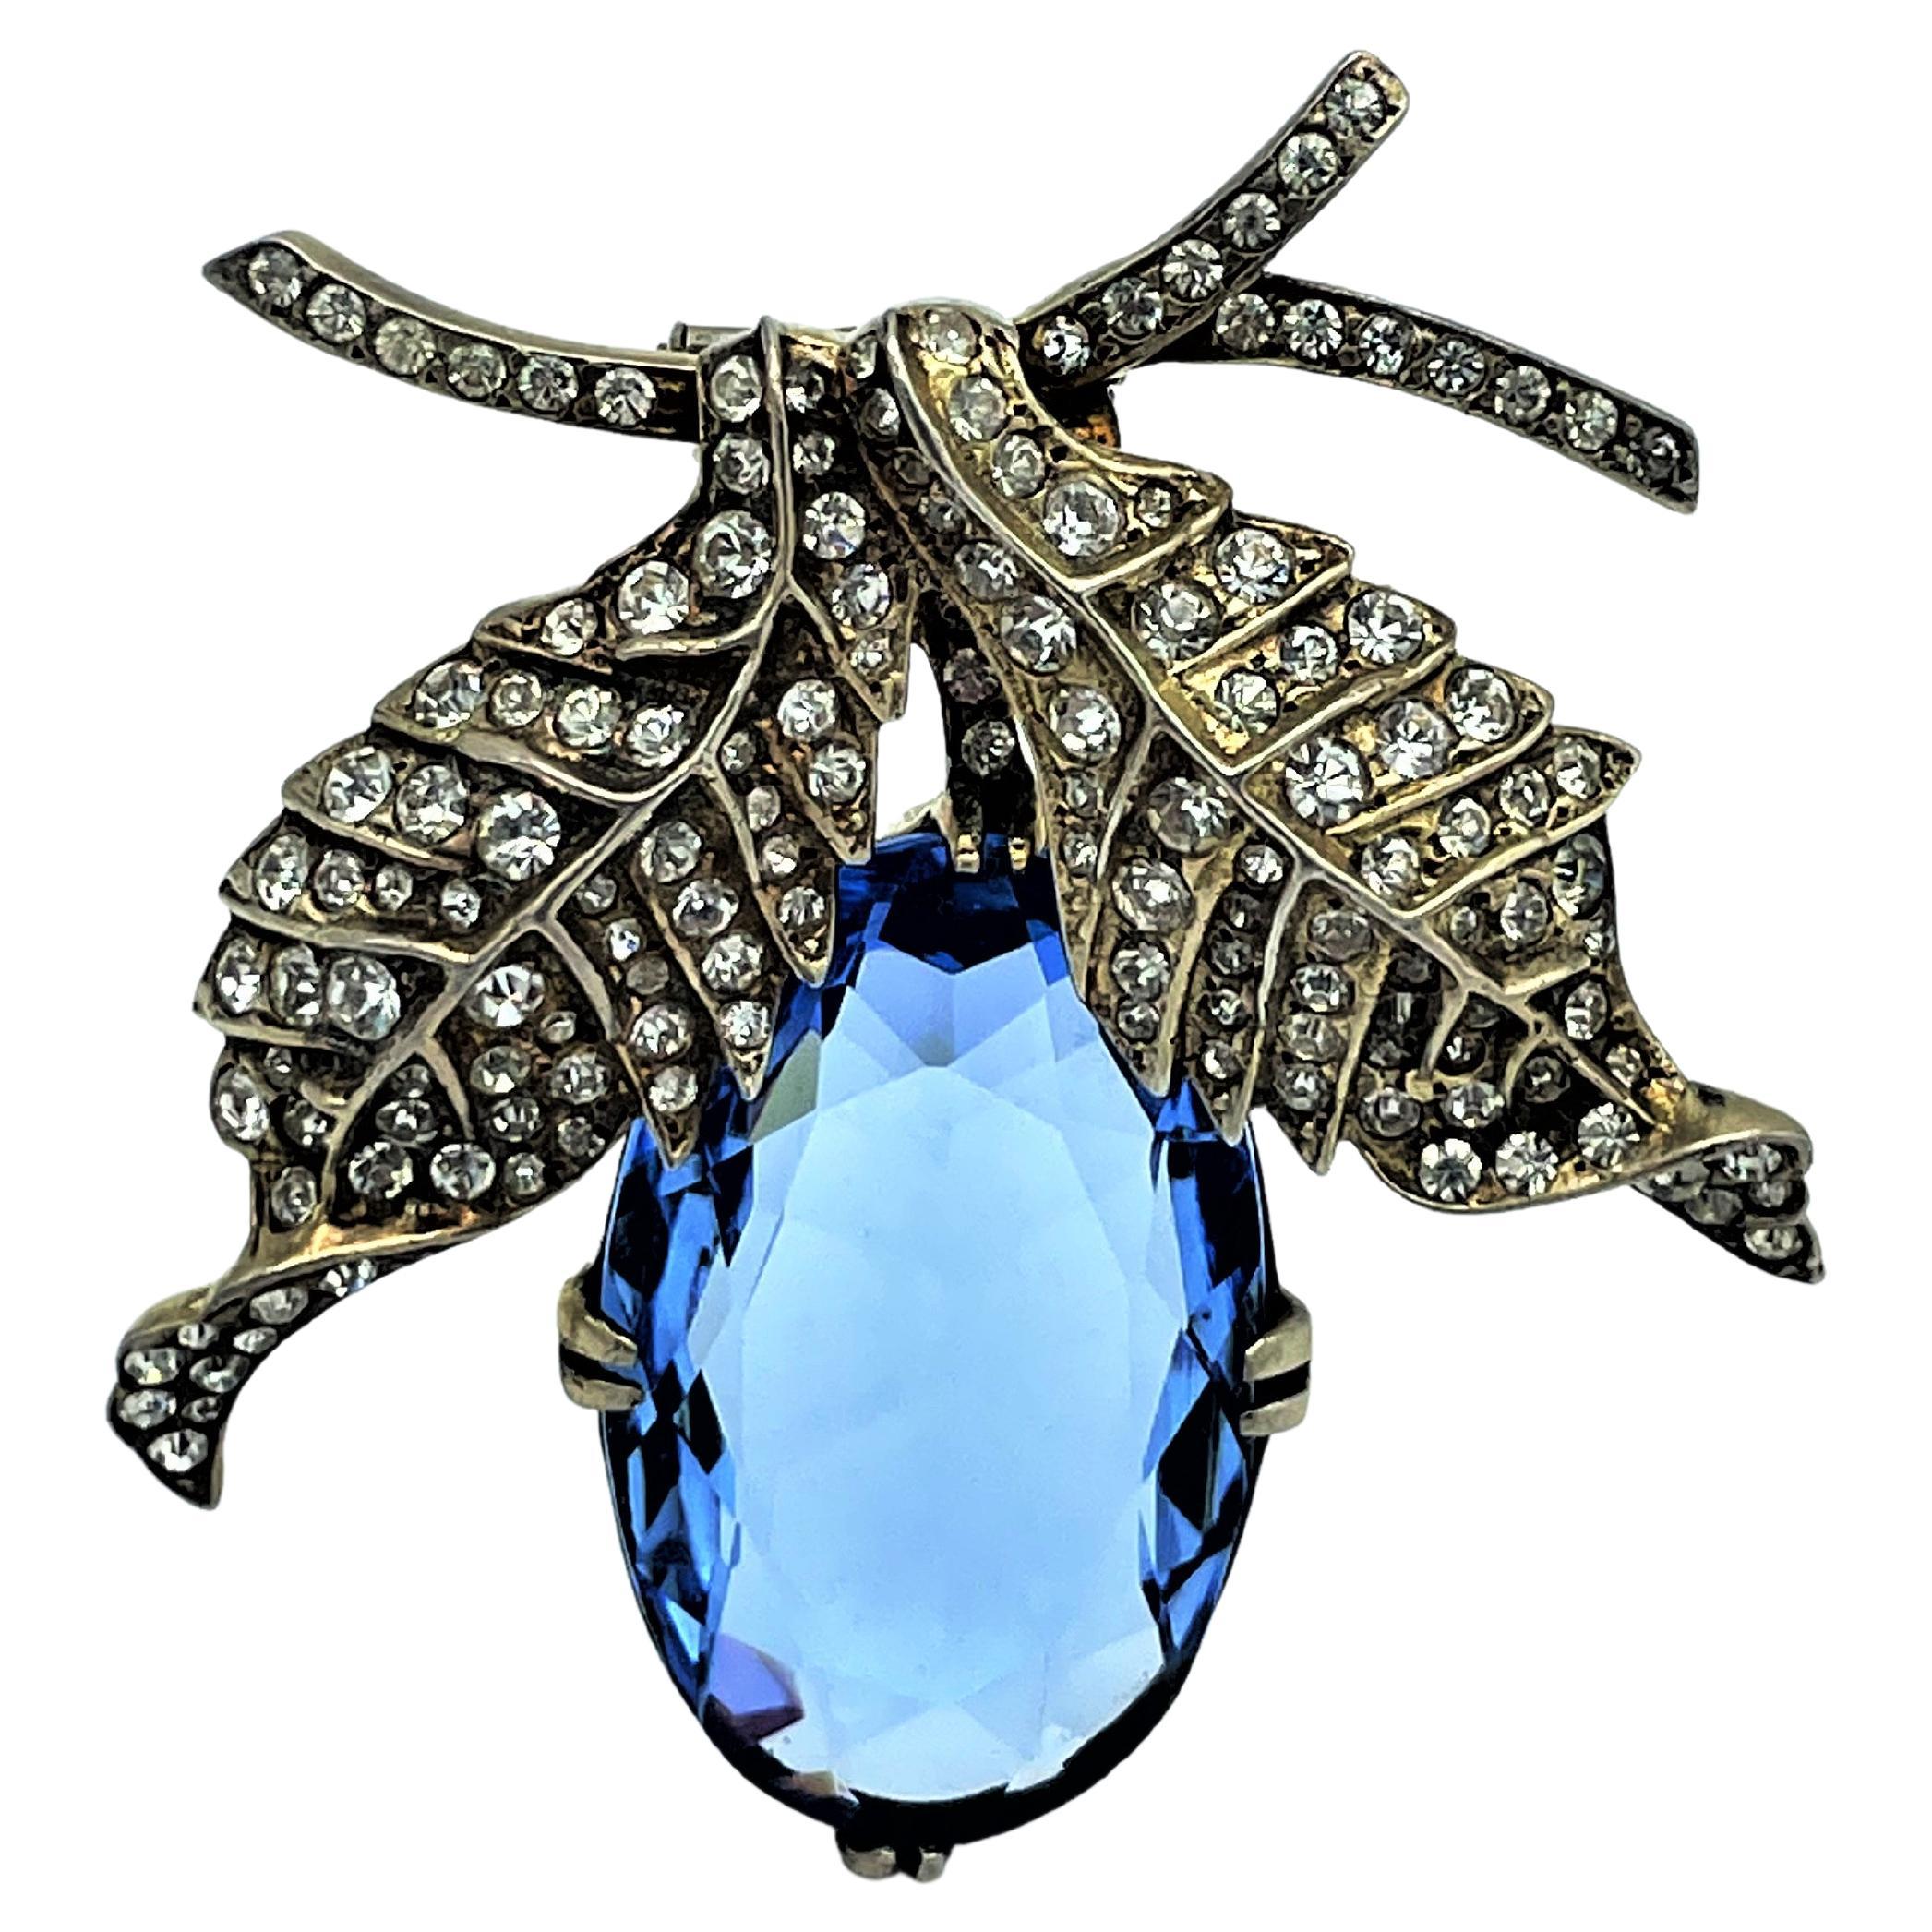 About
Eisenberg sterling gold plated pin/brooch in the shape of a blue fruit hanging from two rhinestone leaves. 
Measurement:
Height 6 cm 
Width of the brooch/pin  6 cm, t he blue cut rhinestone 4,5 cm x 2,5 cm 
Features 
- Eisenberg Original,